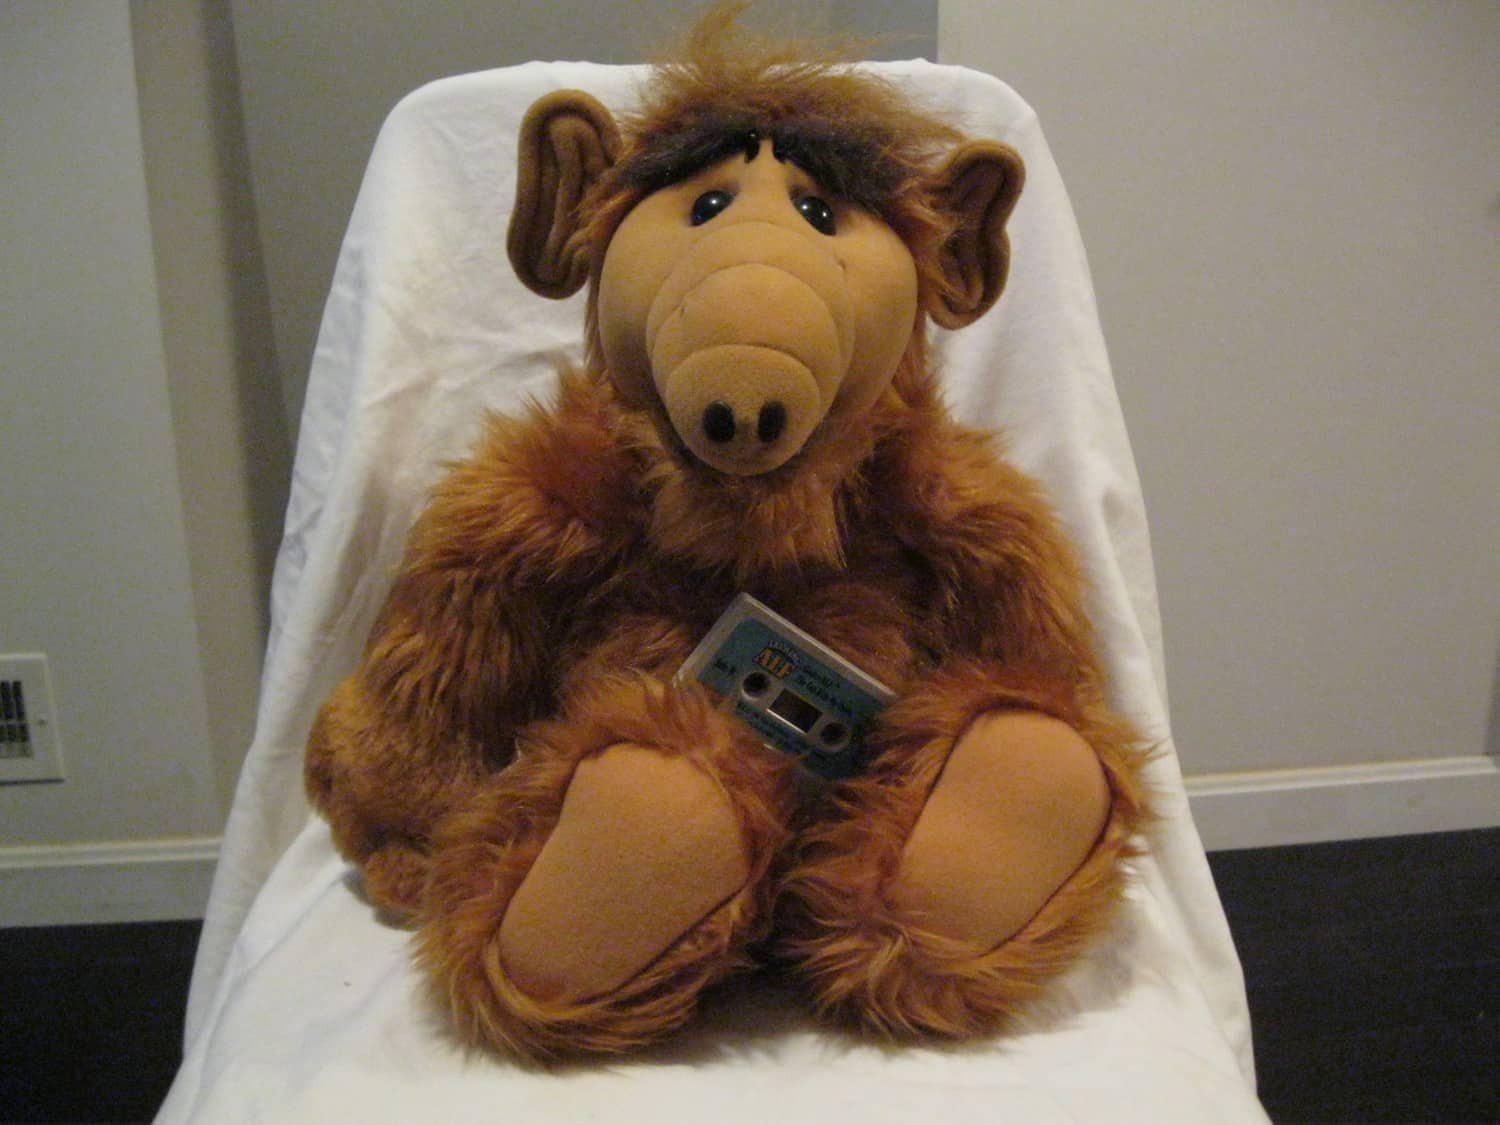 The Talking Alf Doll,Who doesn’t remember Alf? That lovable alien from the planet Melmac who lands in the garbage of a typically suburban family. He’s lovable, furry and an absolute cat lover.